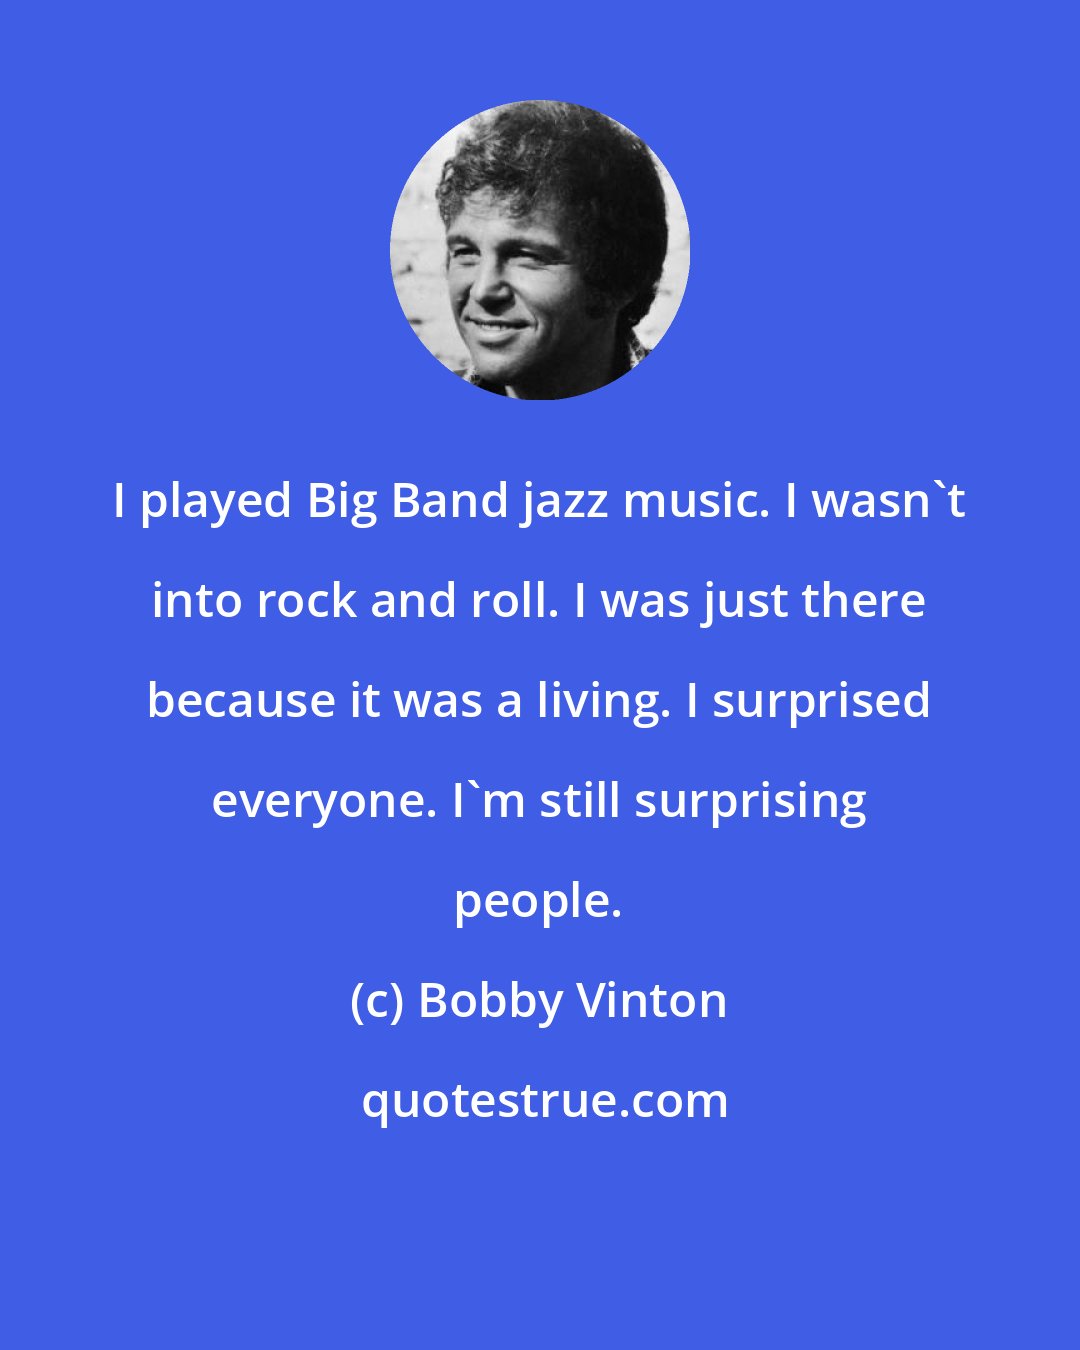 Bobby Vinton: I played Big Band jazz music. I wasn't into rock and roll. I was just there because it was a living. I surprised everyone. I'm still surprising people.